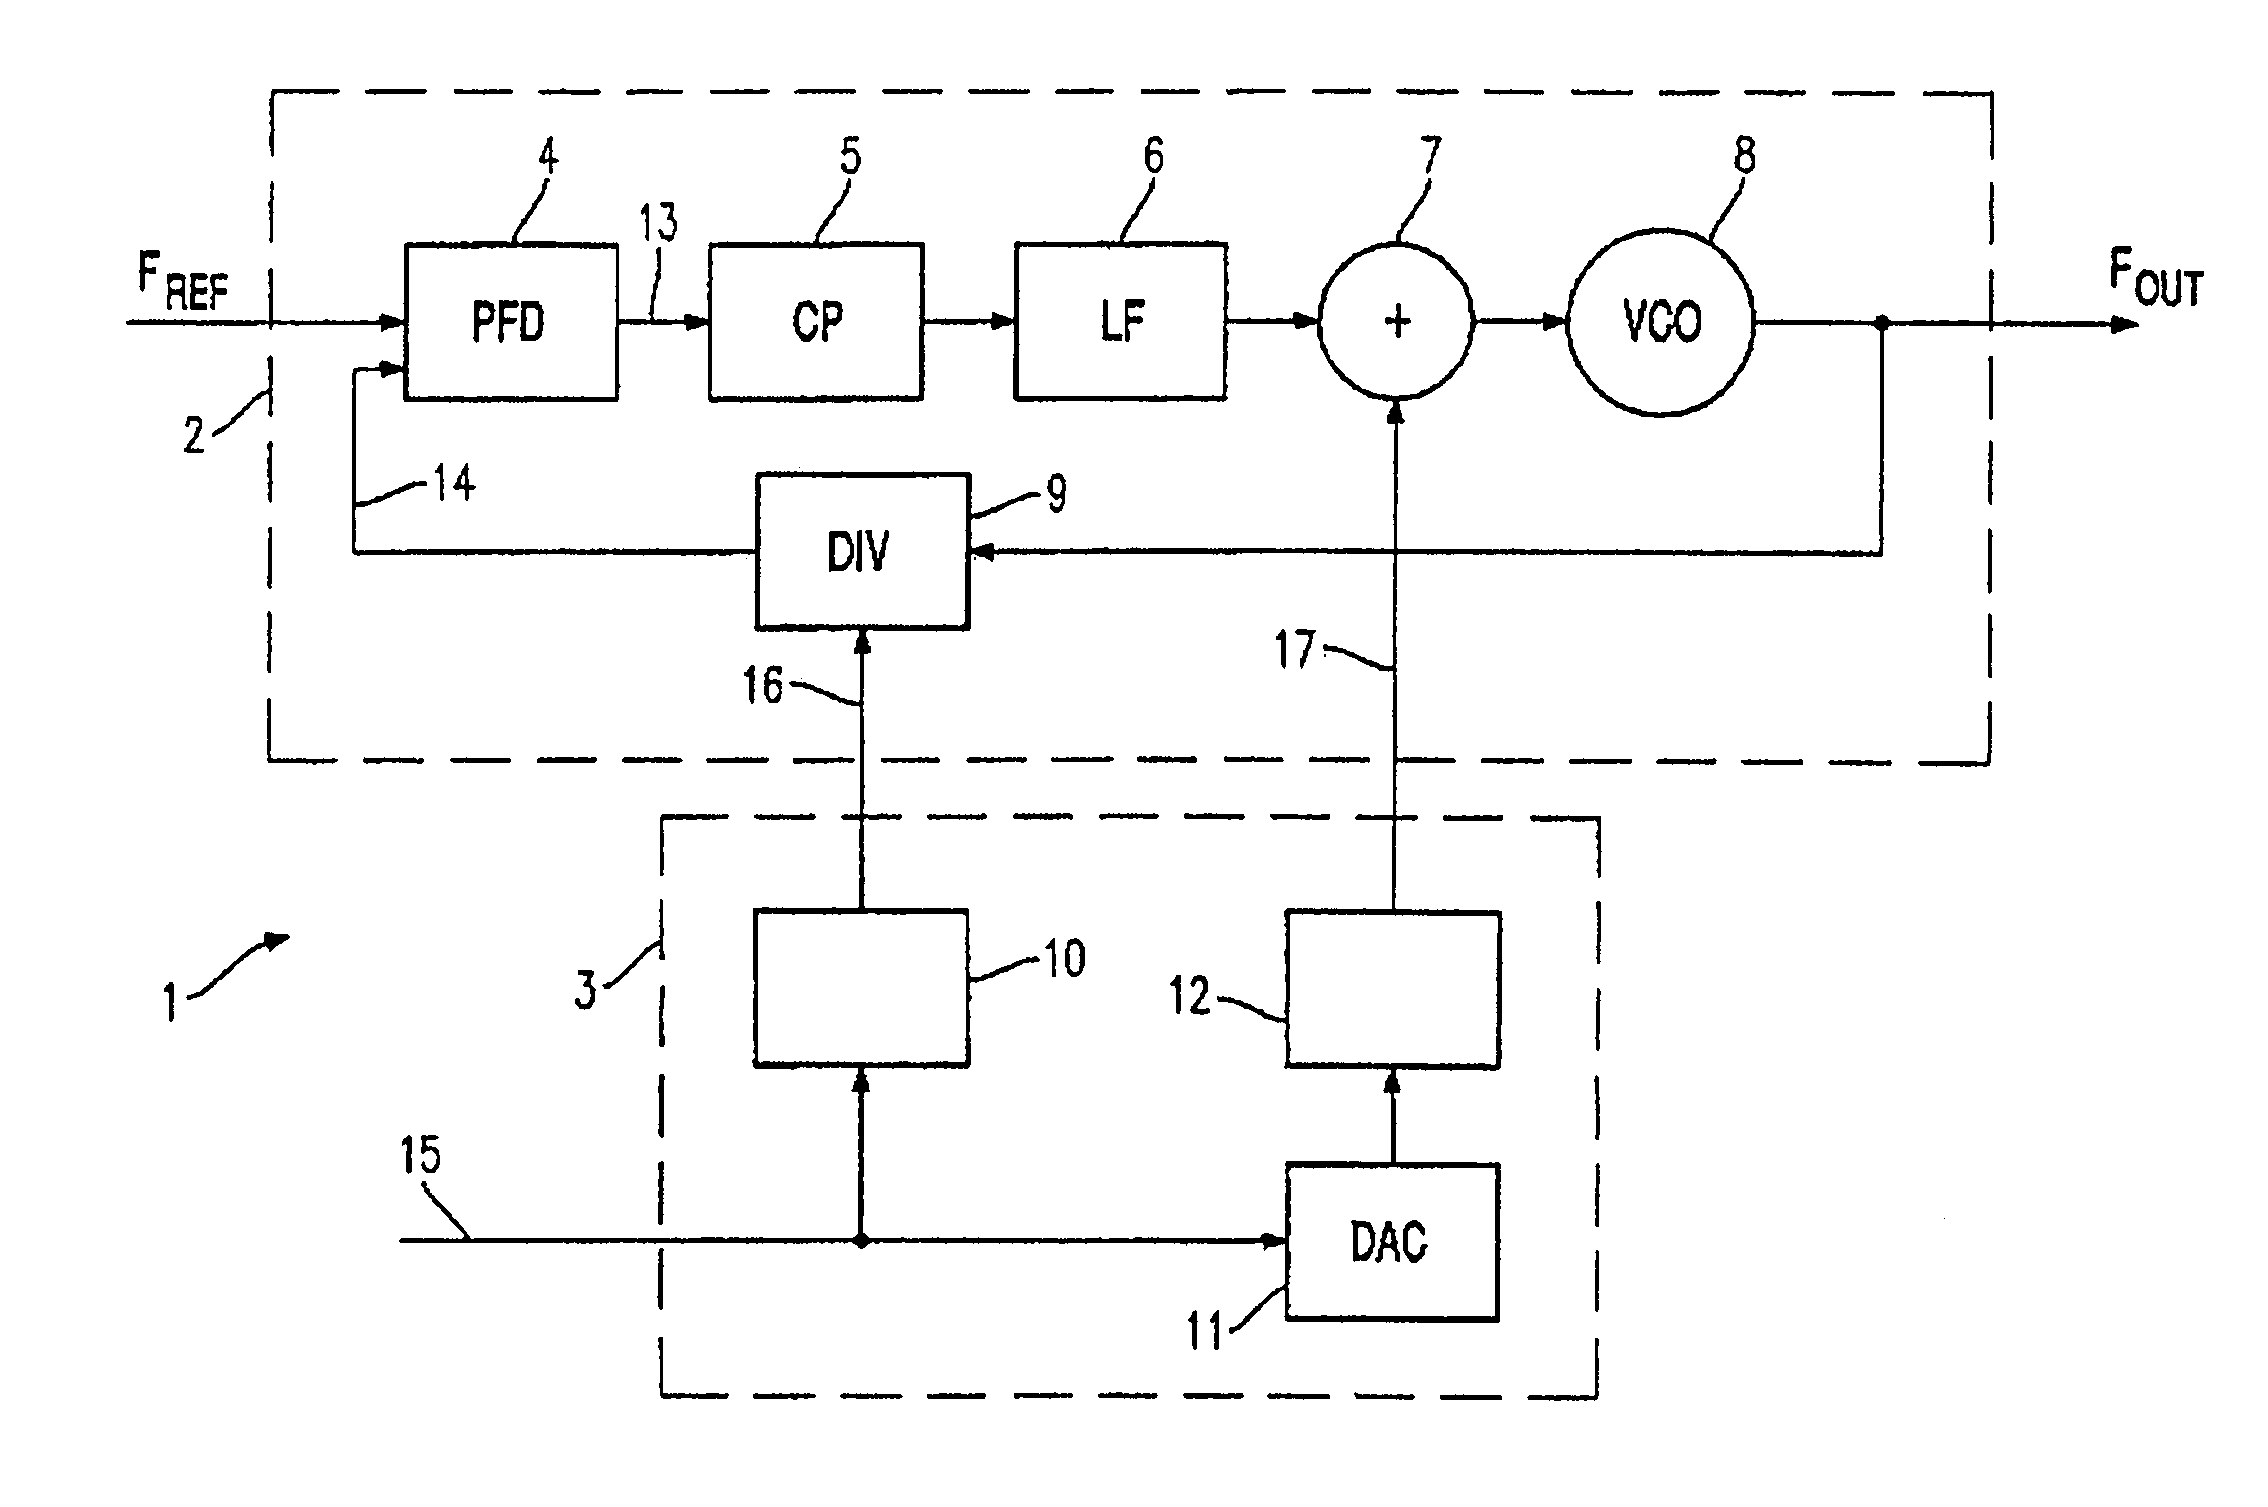 Two-point modulator comprising a PLL circuit and a simplified digital pre-filtering system